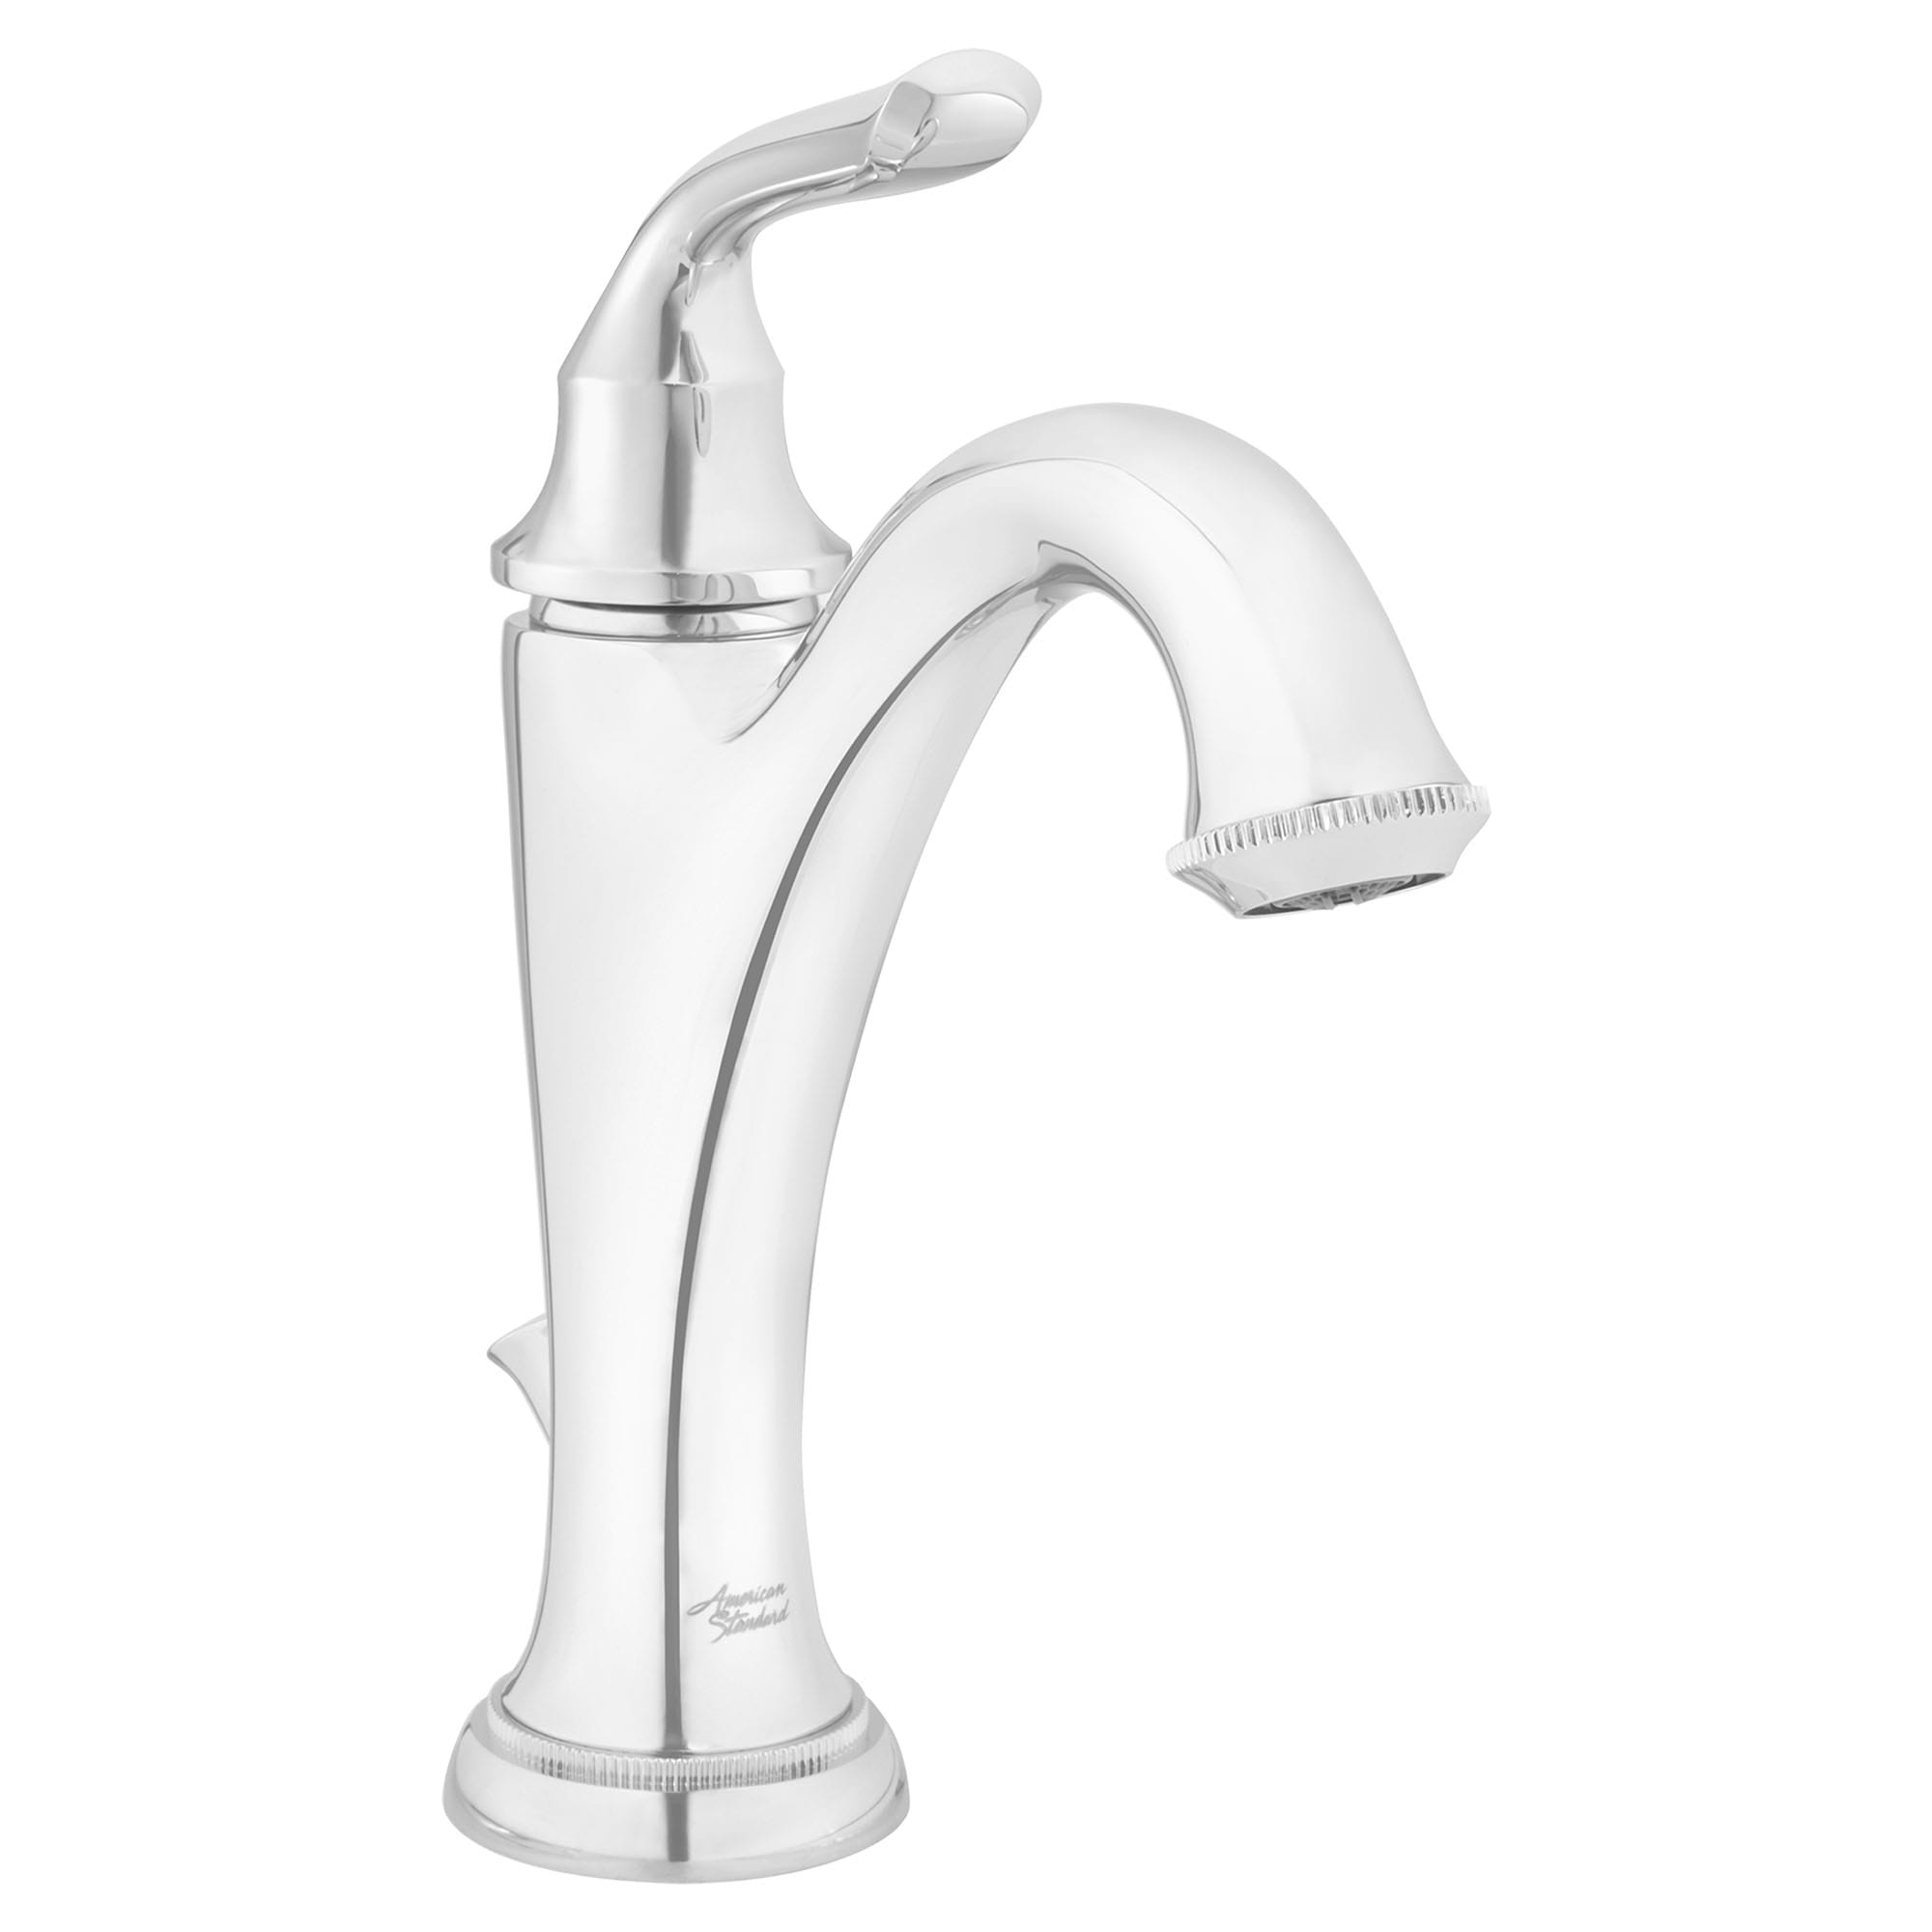 Patience® Single Hole Single-Handle Bathroom Faucet 1.2 gpm/4.5 L/min With Lever Handle